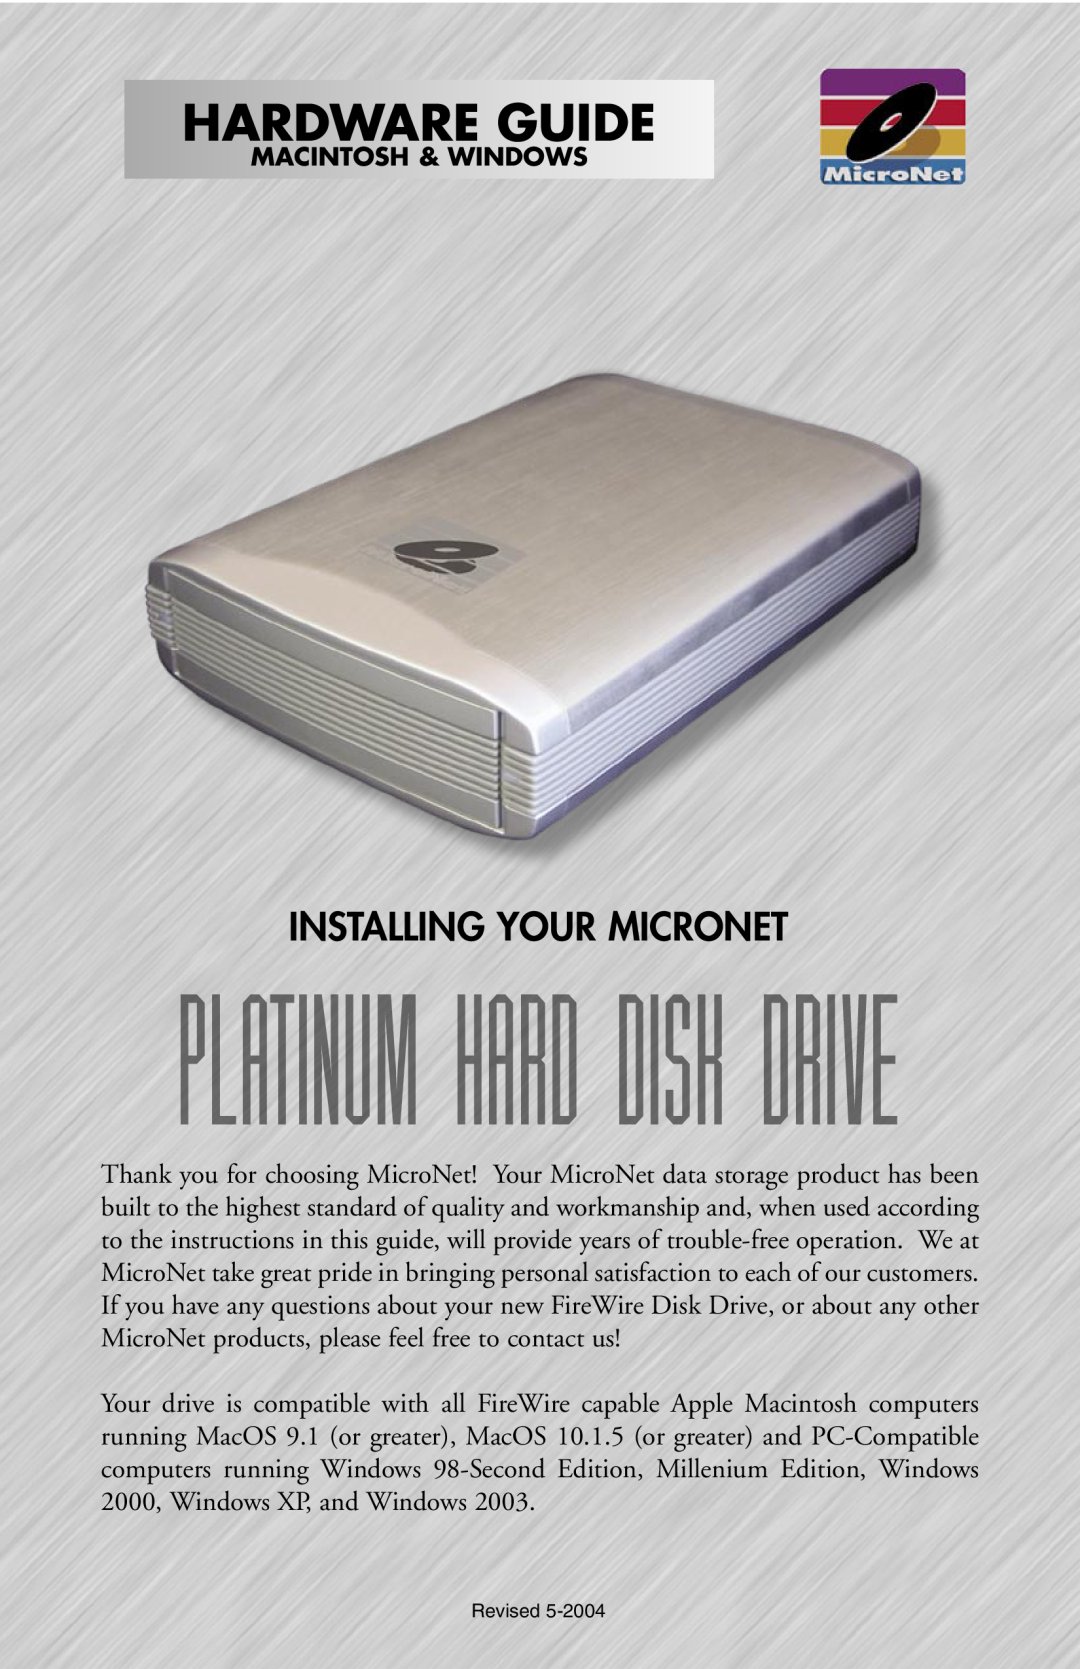 Structured Cable Products apple manual Platinum Hard Disk Drive, Hardware Guide, Installing Your Micronet 